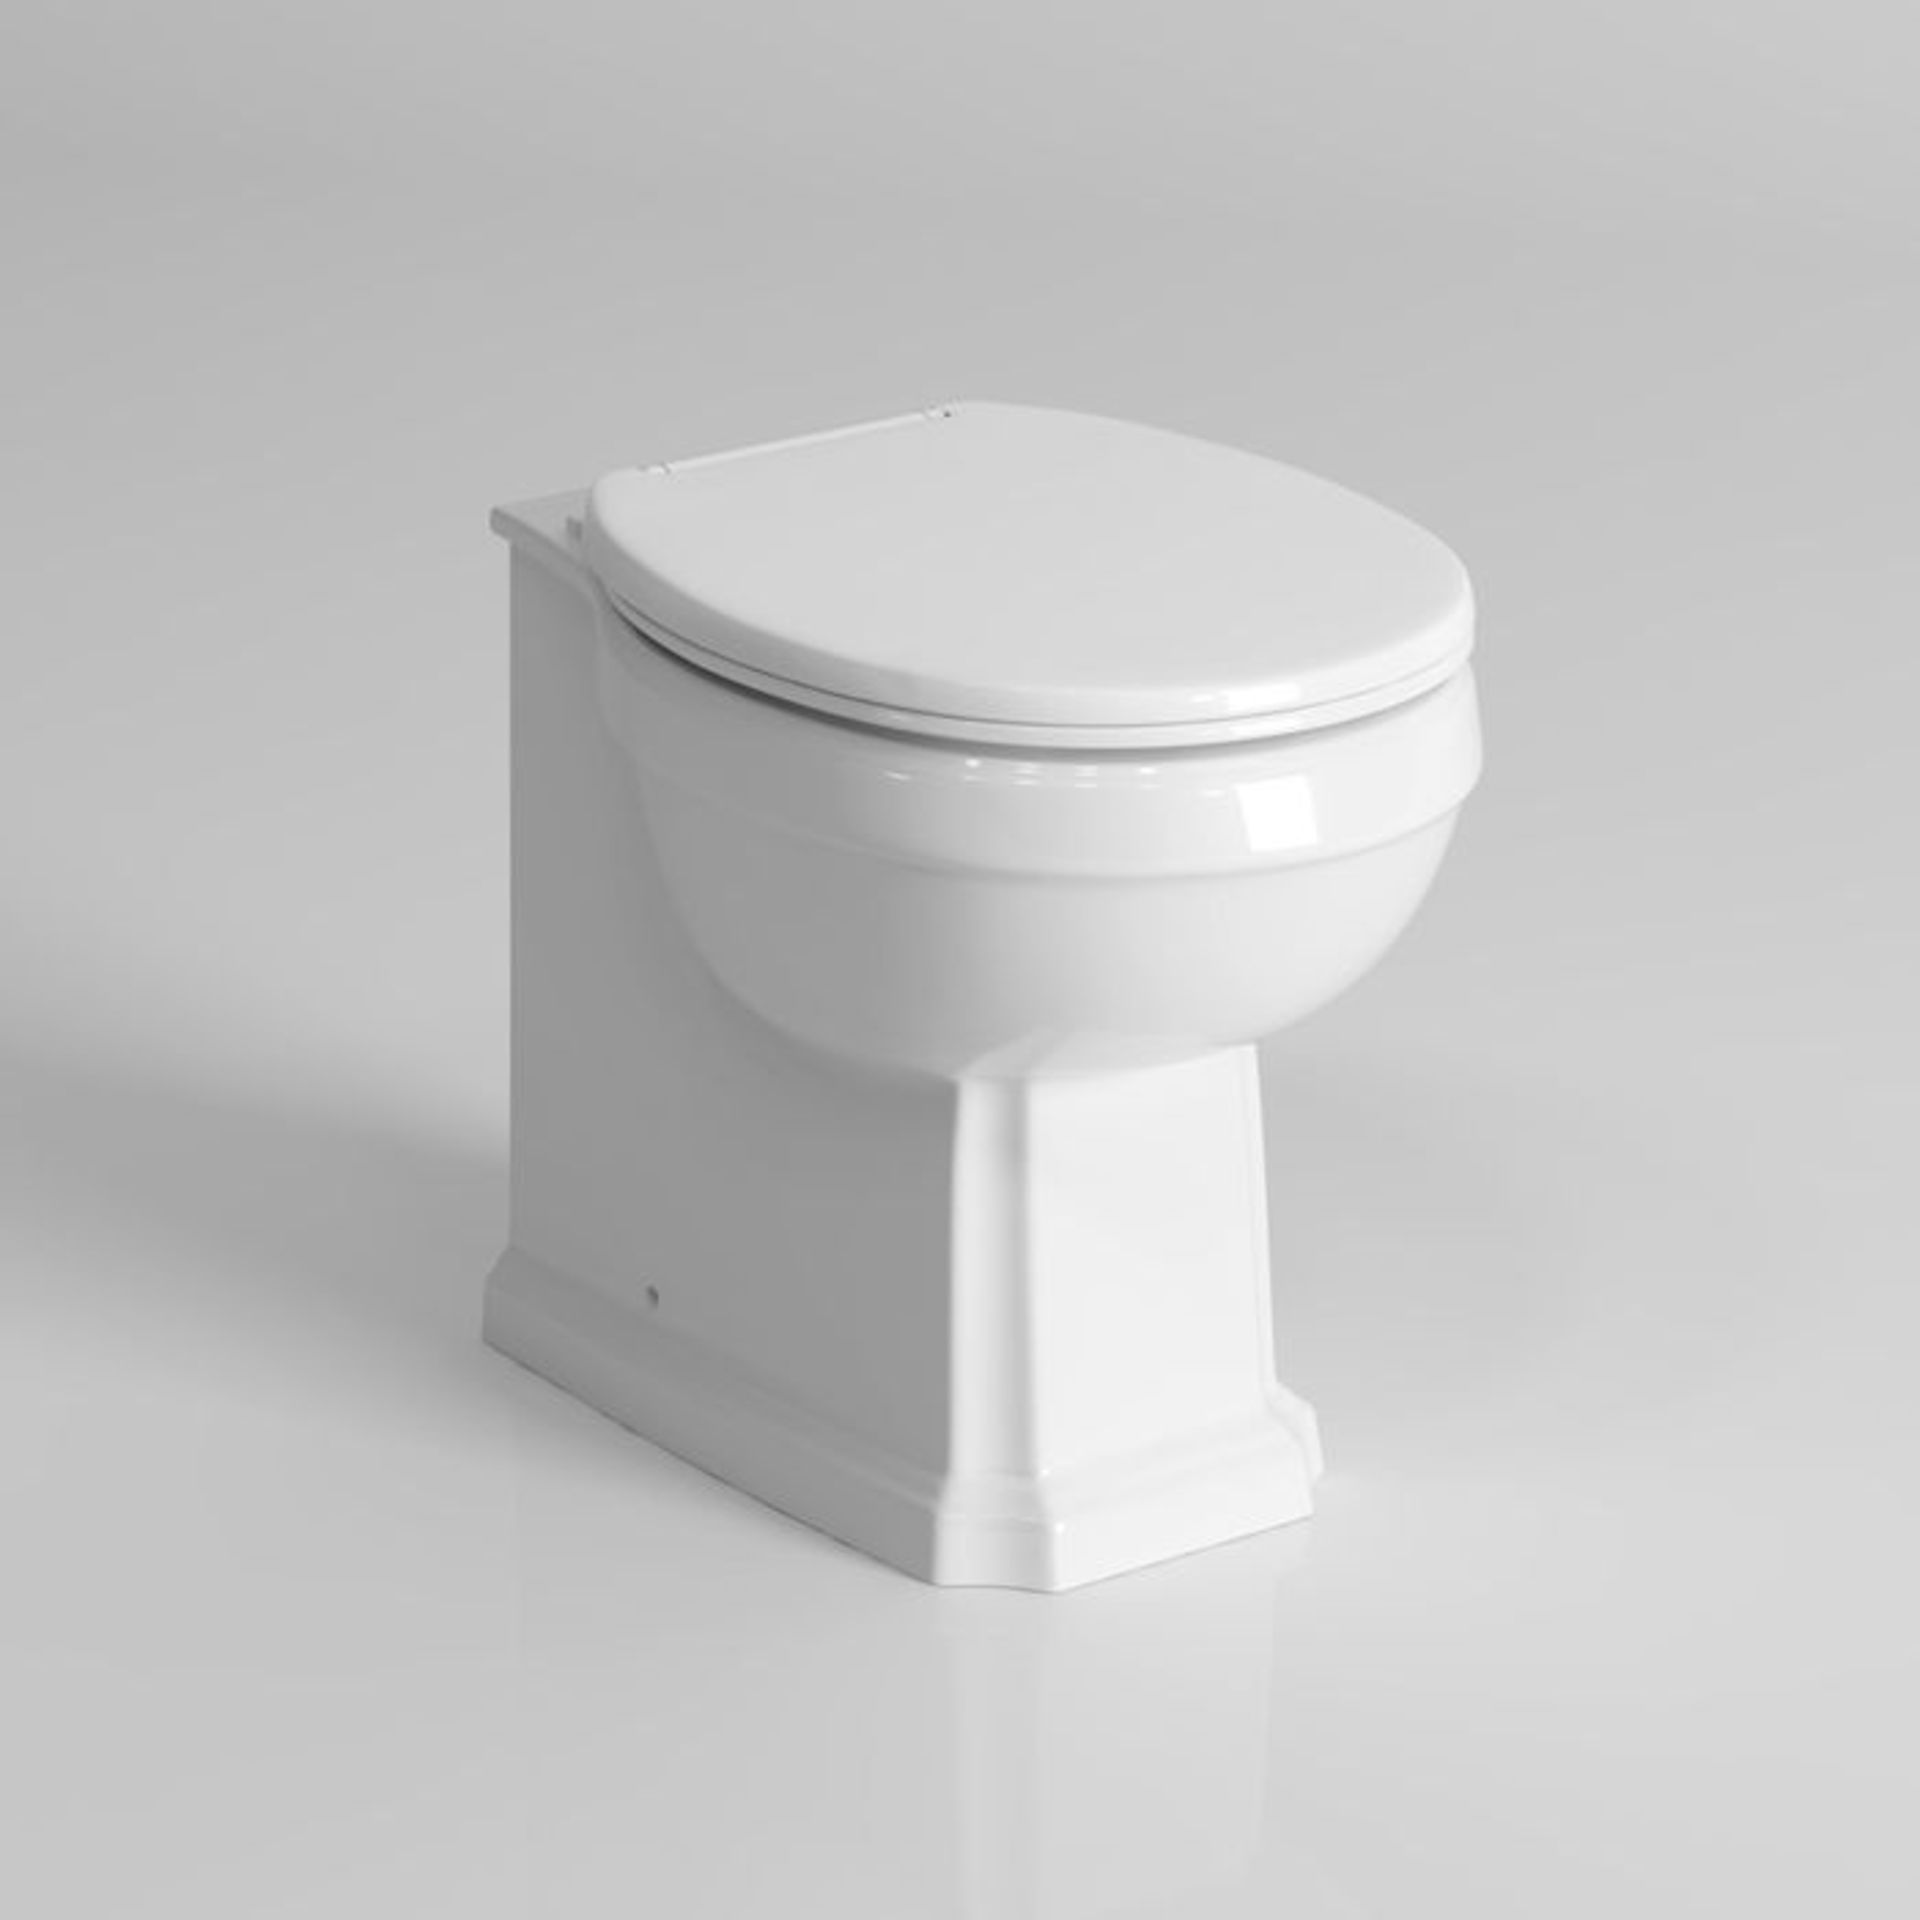 (M134) Victoria II Traditional Back To Wall Toilet - White Seat. RRP £324.99. Traditional features - Image 3 of 4